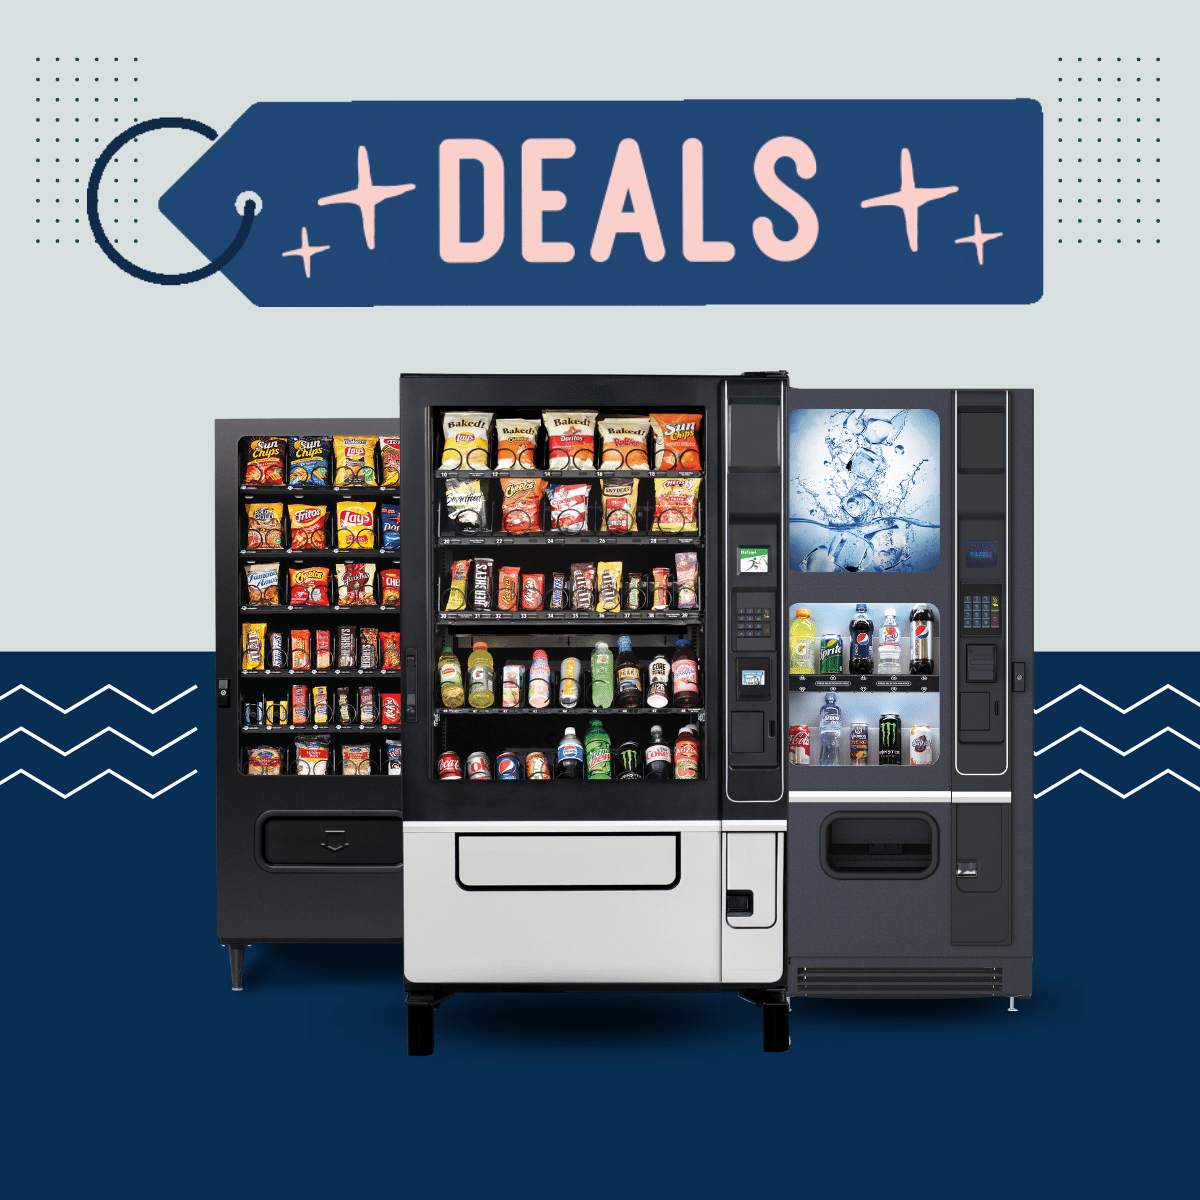 WHERE DO YOU GO TO FIND THE BEST DEALS ON VENDING MACHINE SALES?